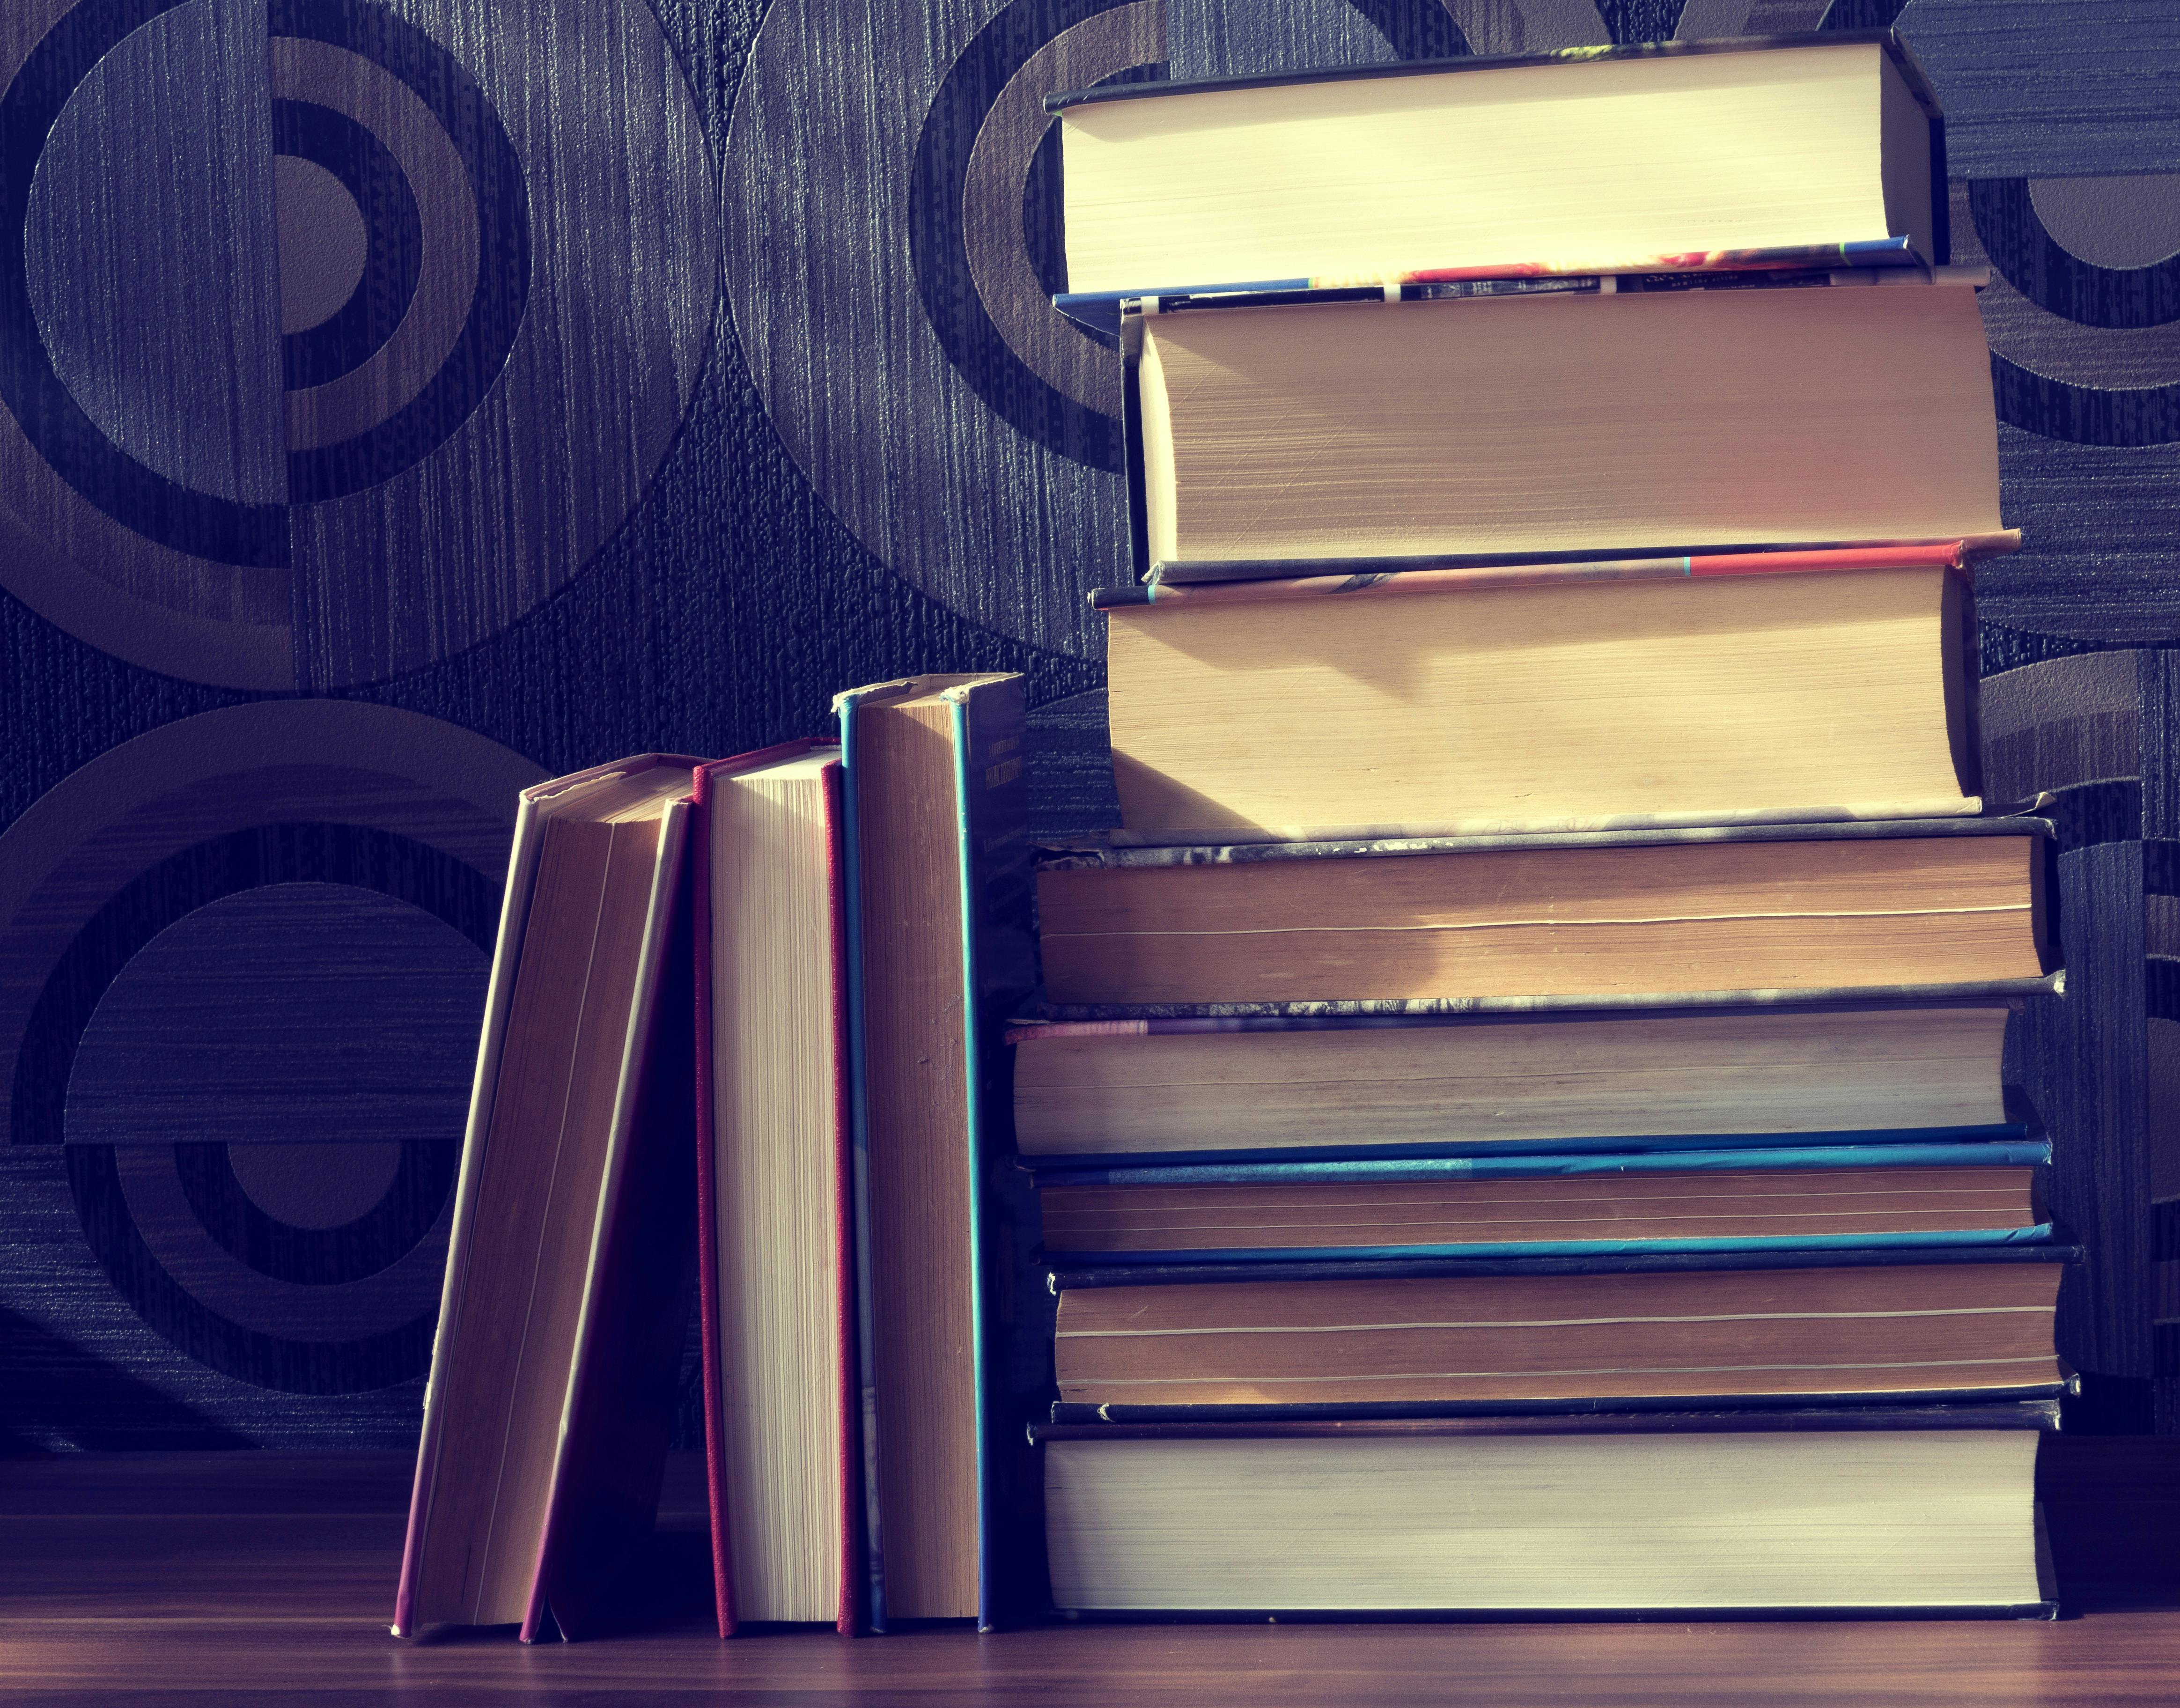 Free stock photo of book stack, books, classic